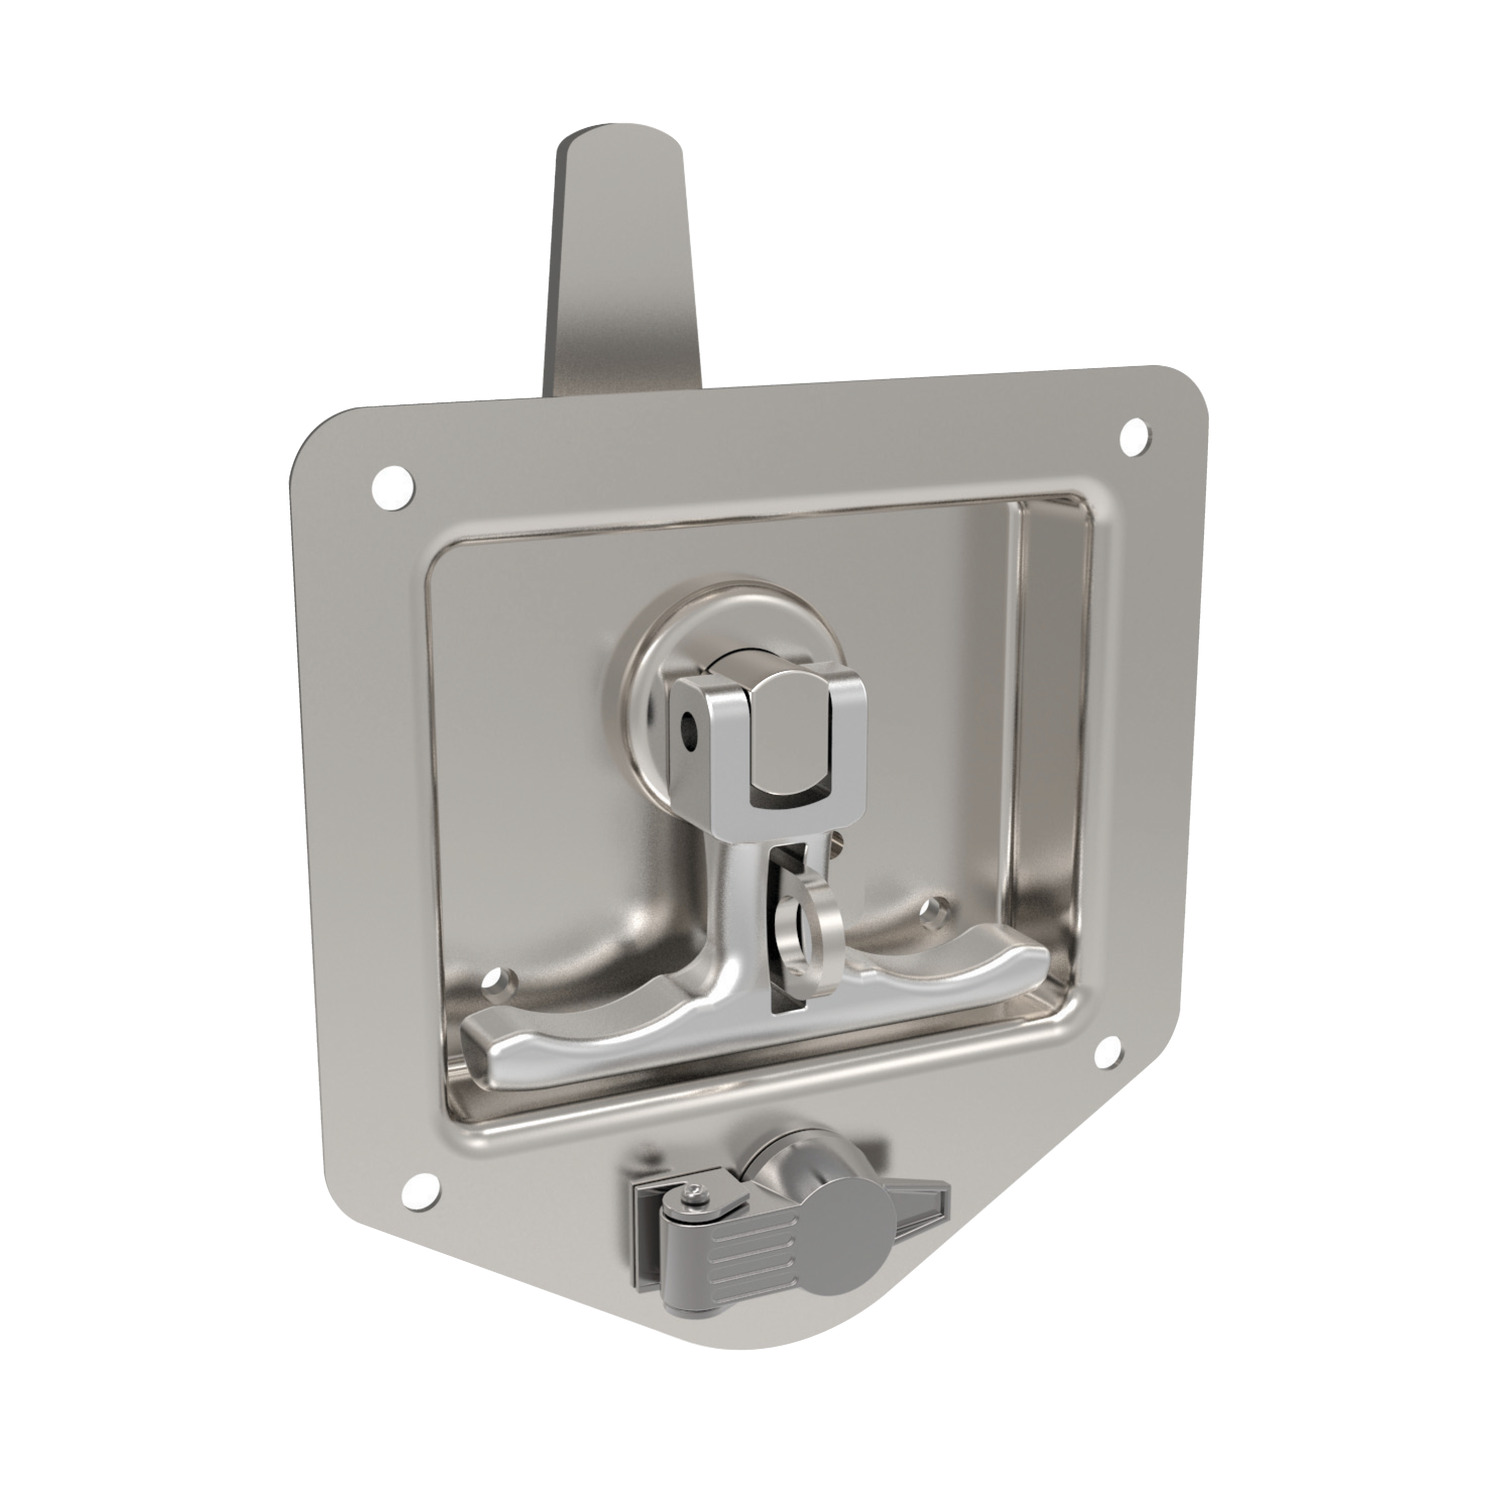 Product B4586, Cam Latch - Flush T-handle vertical - heavy duty - fixed grip - standard cylinder lock - stainless / 